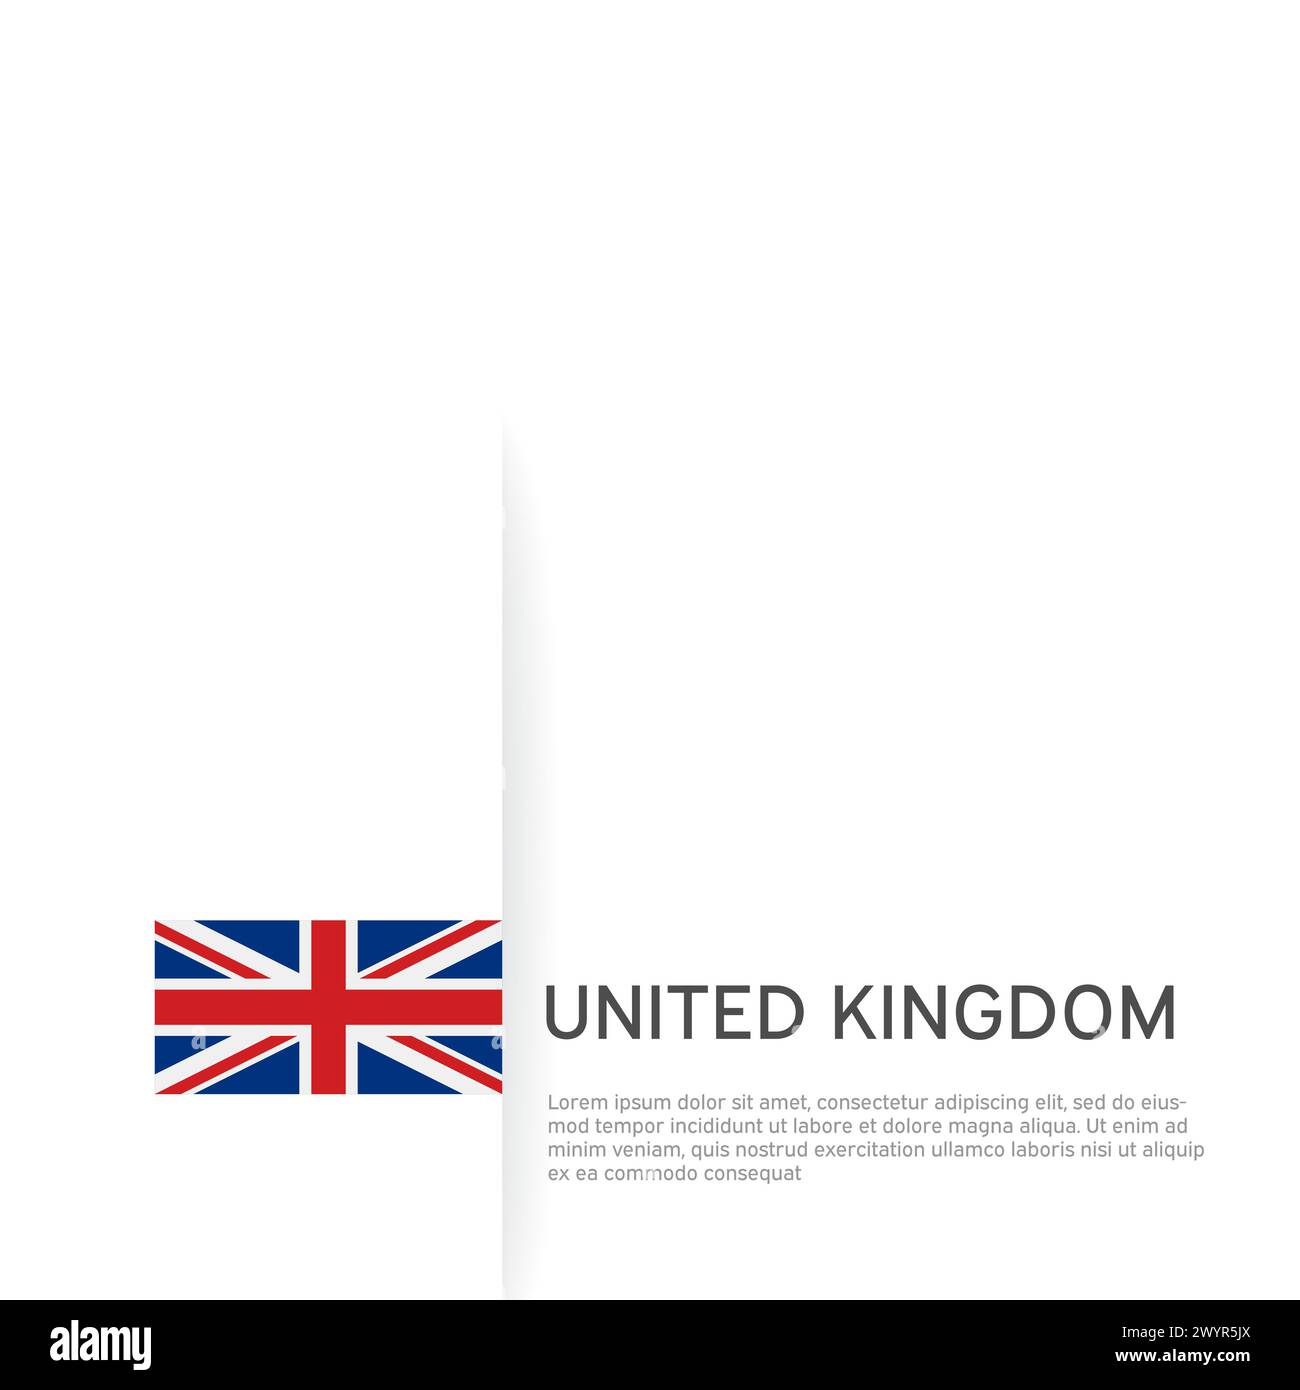 United Kingdom flag background. State patriotic great britain banner, cover. Document template with uk flag, white background. National uk poster Stock Vector